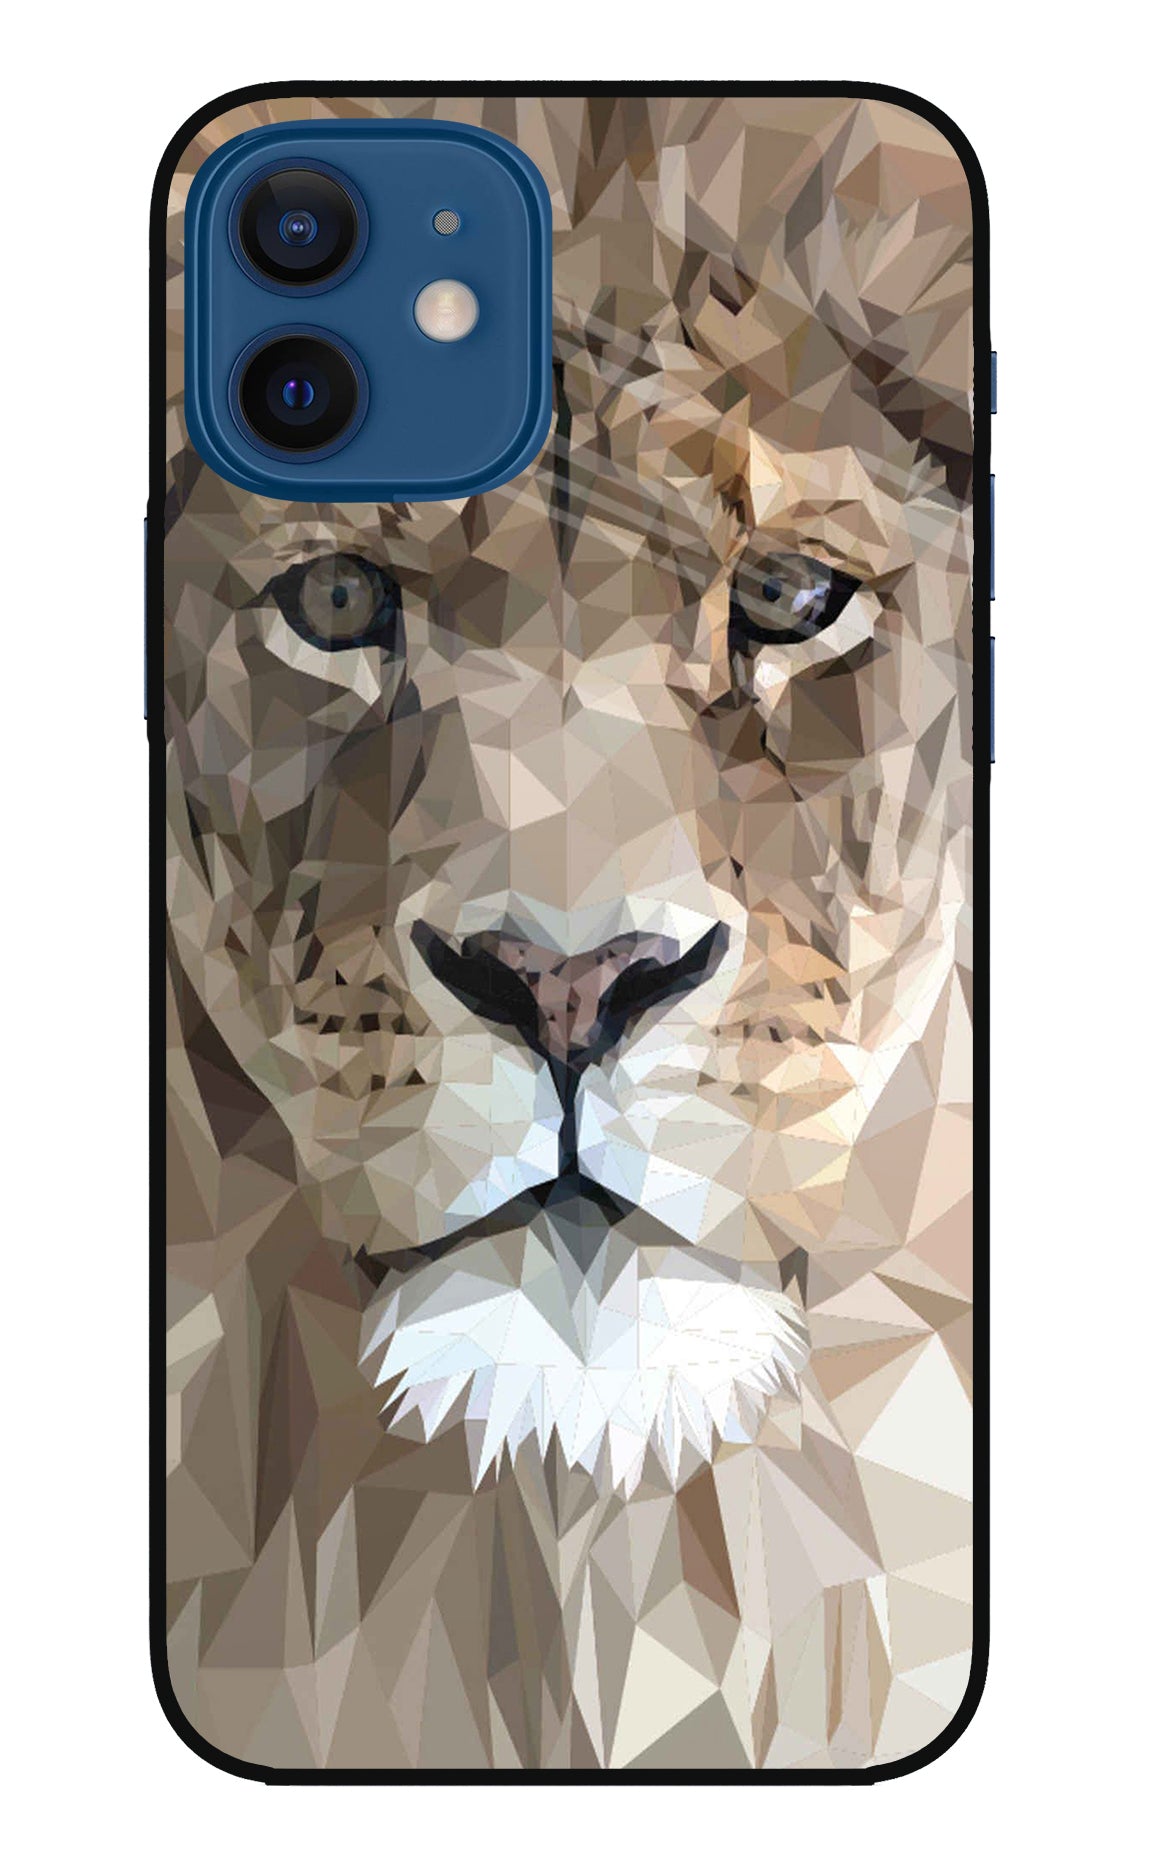 Lion Art iPhone 12 Back Cover